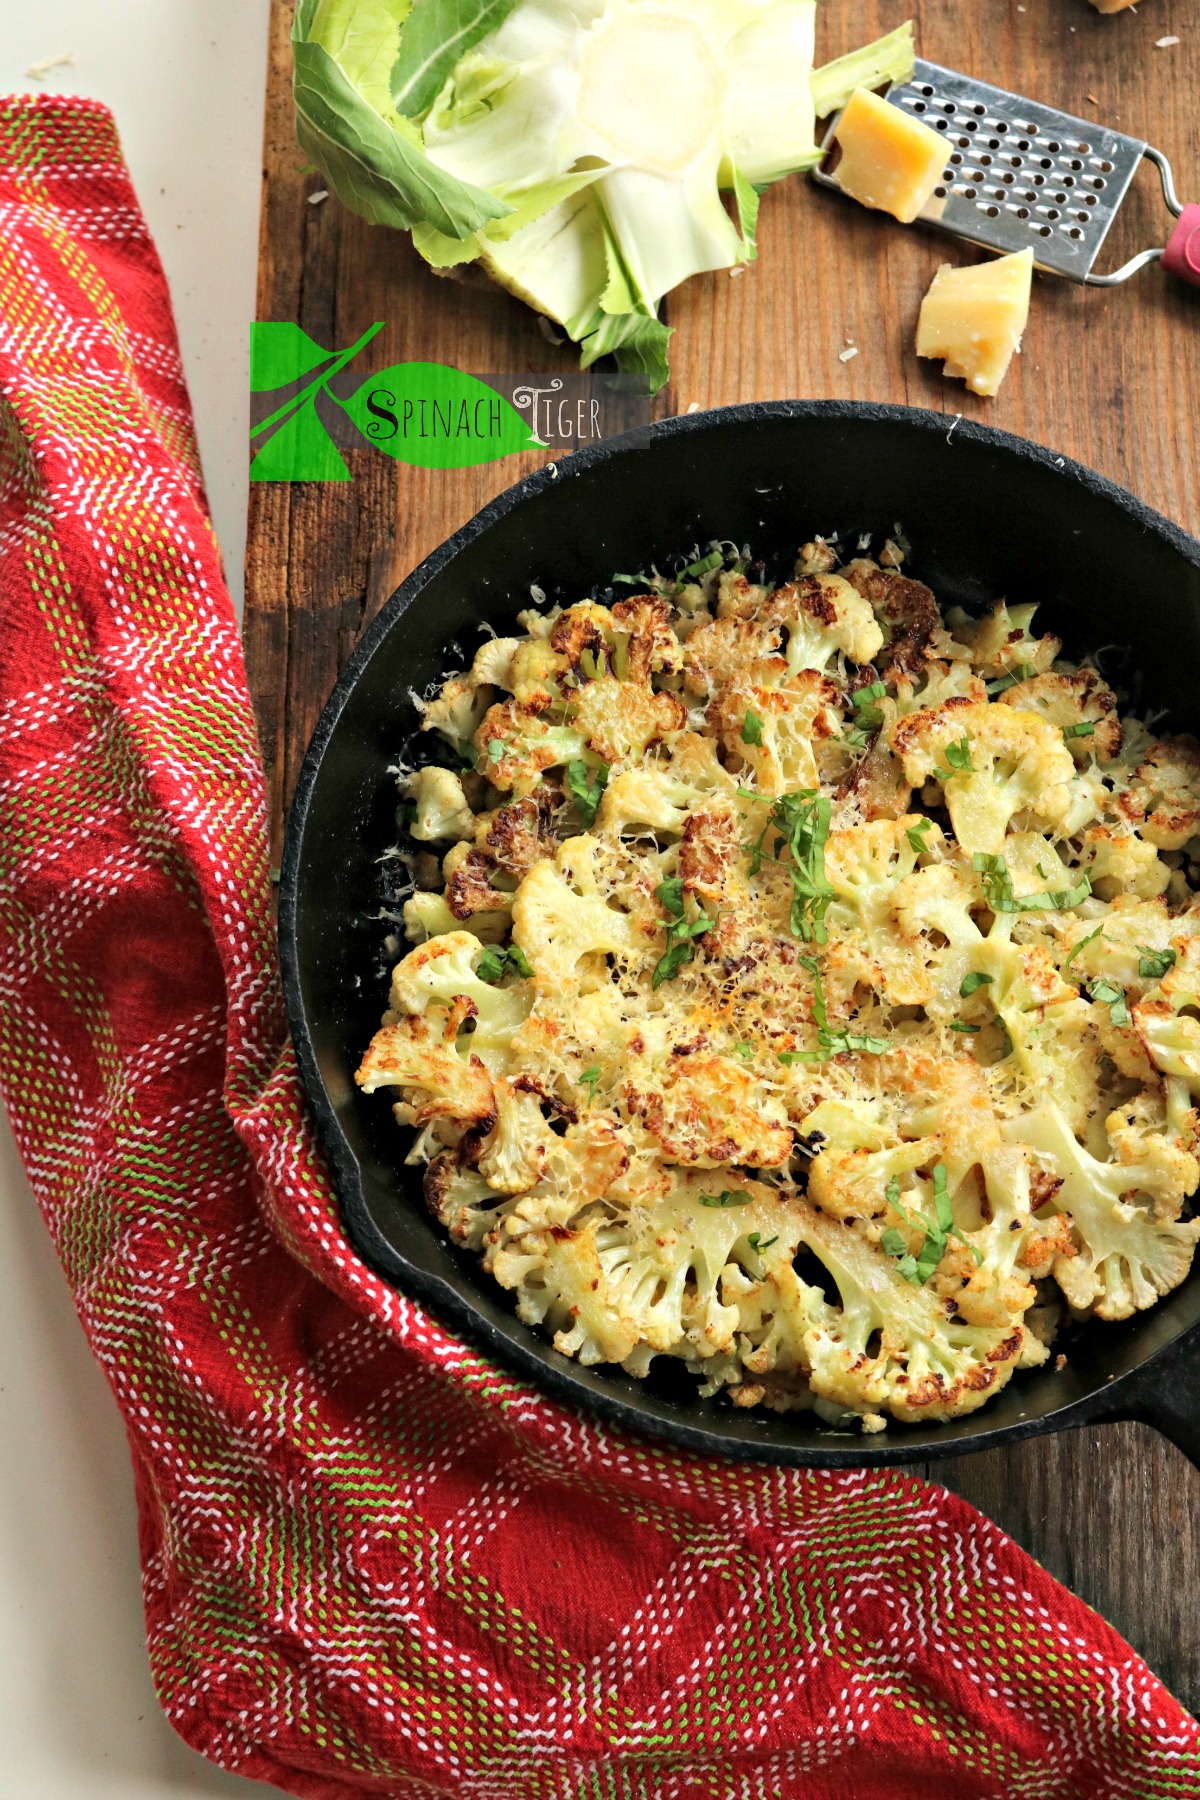 Oven Roasted Cauliflower Recipe with Butter and Parmesan from Spinach Tiger